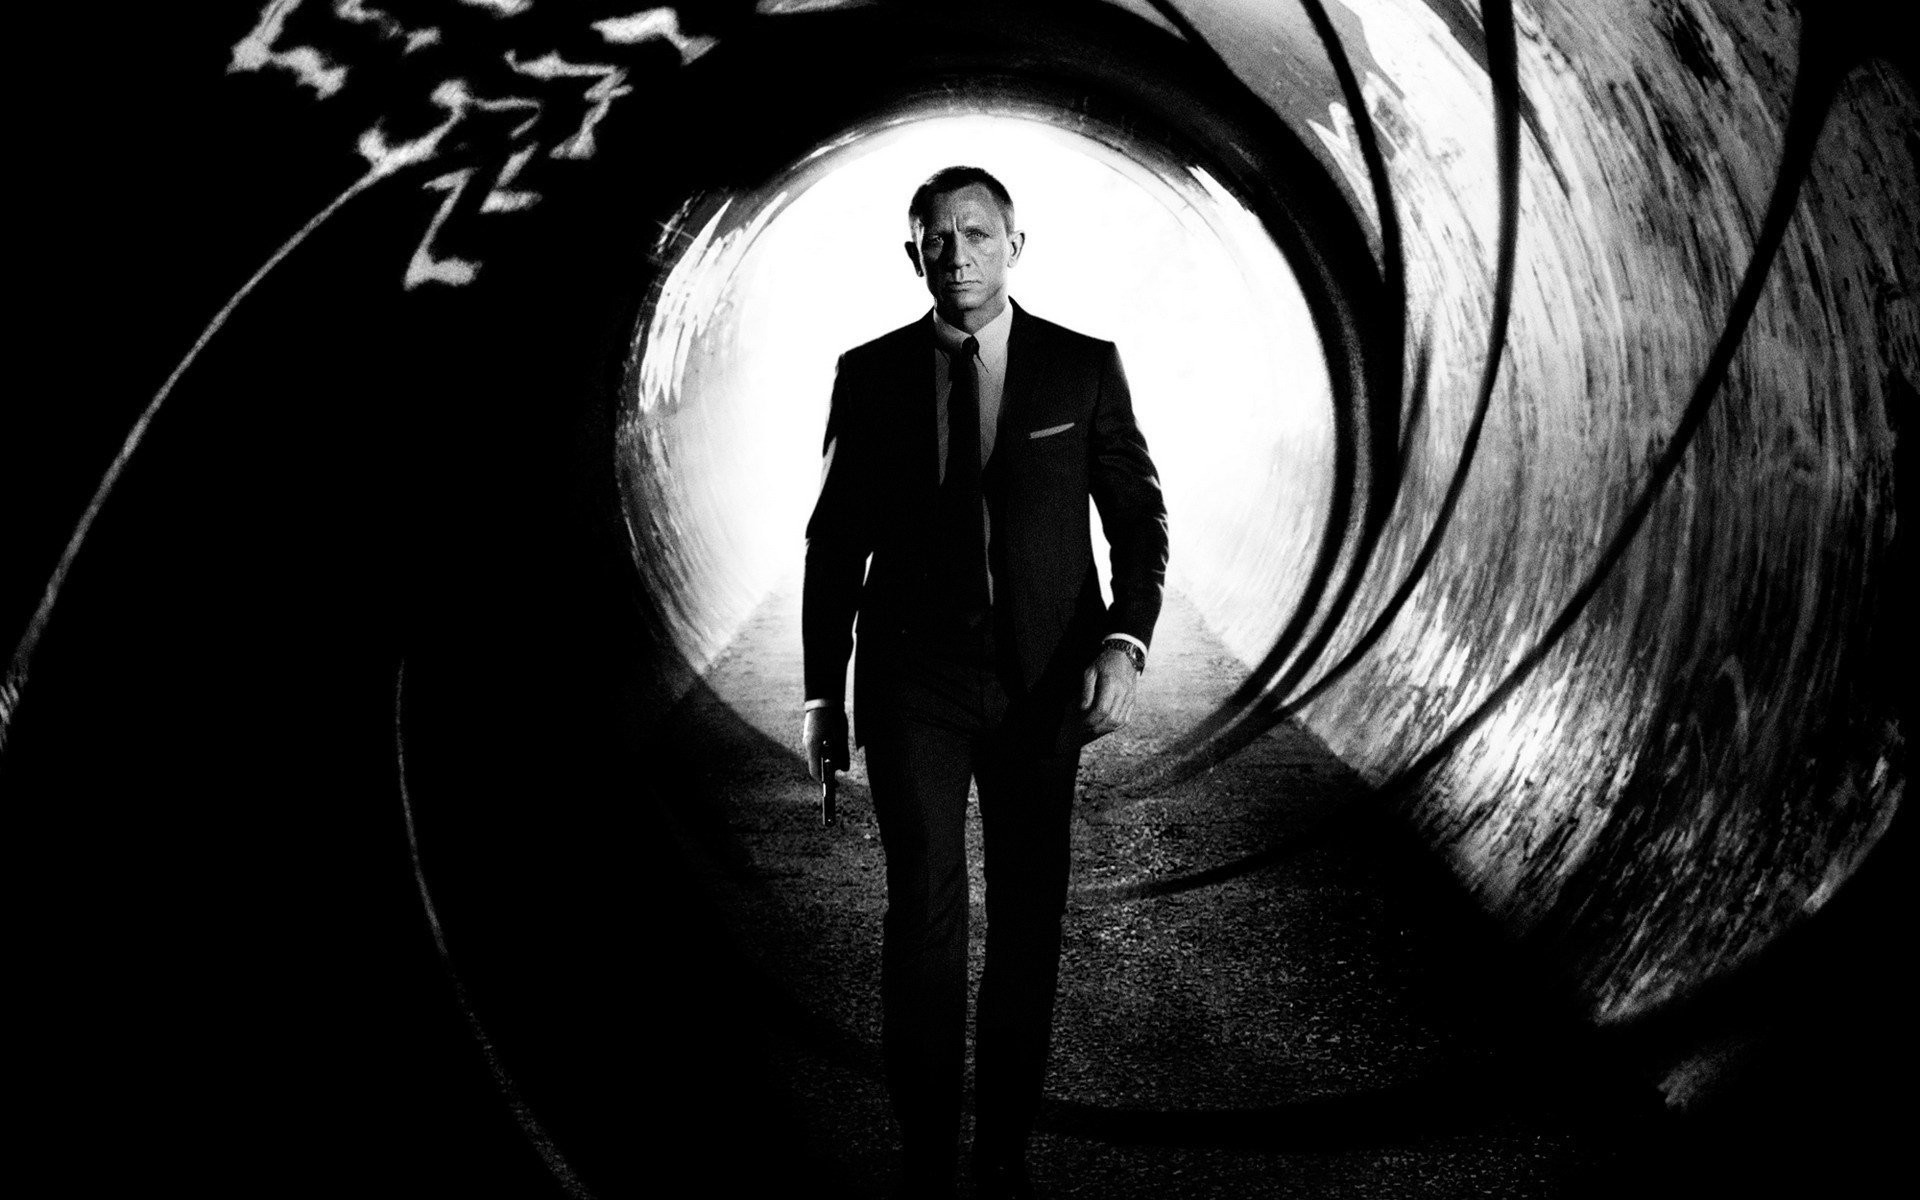 daniel craig hd wallpapers,darkness,black and white,standing,monochrome photography,photography